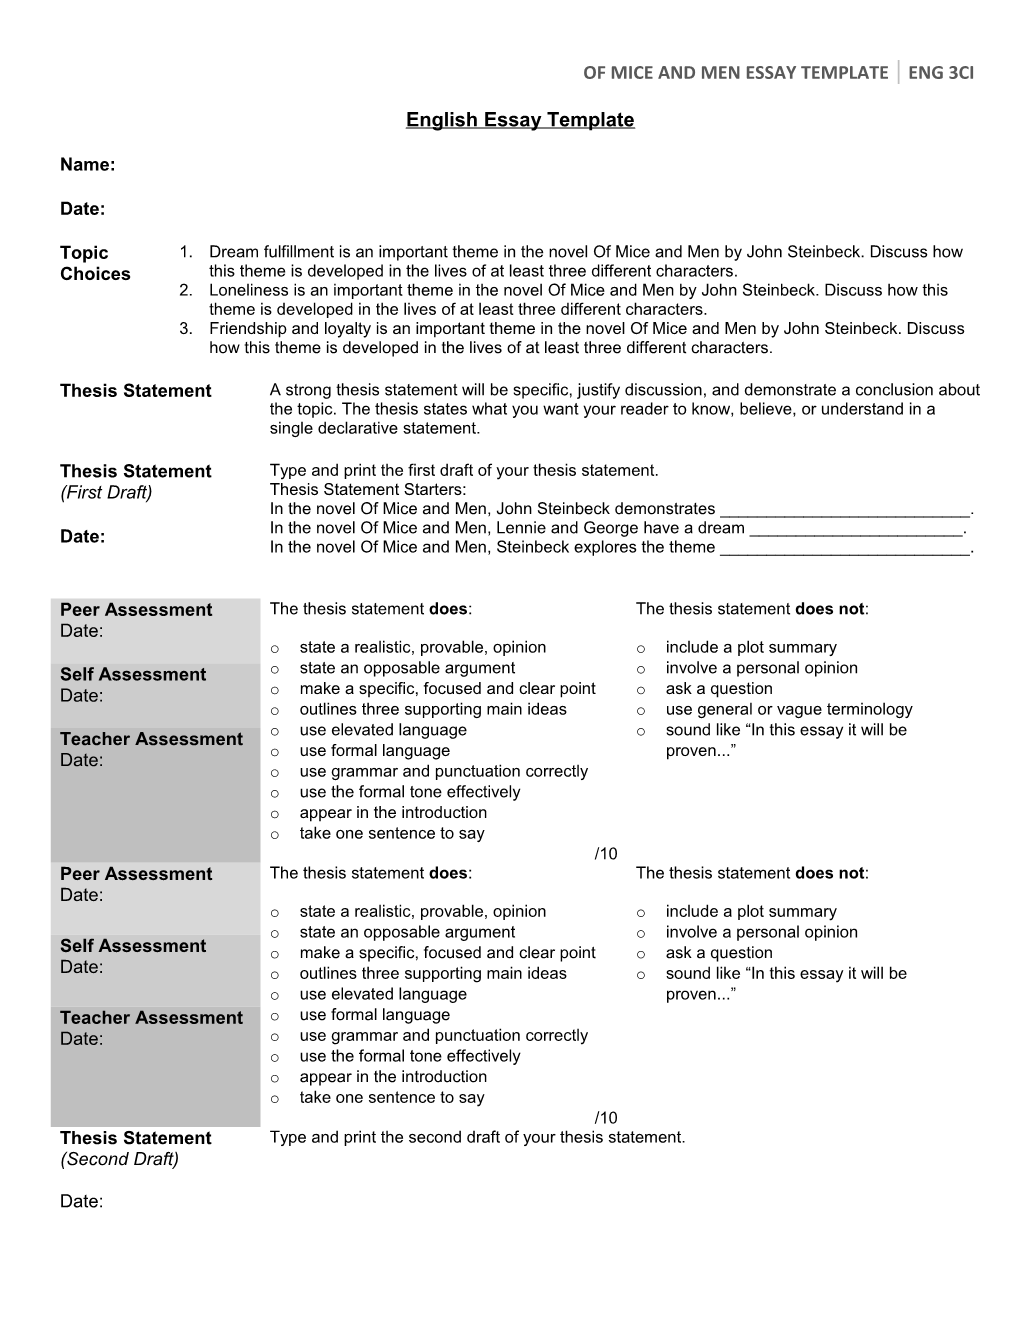 Of Mice and Men Essay Template